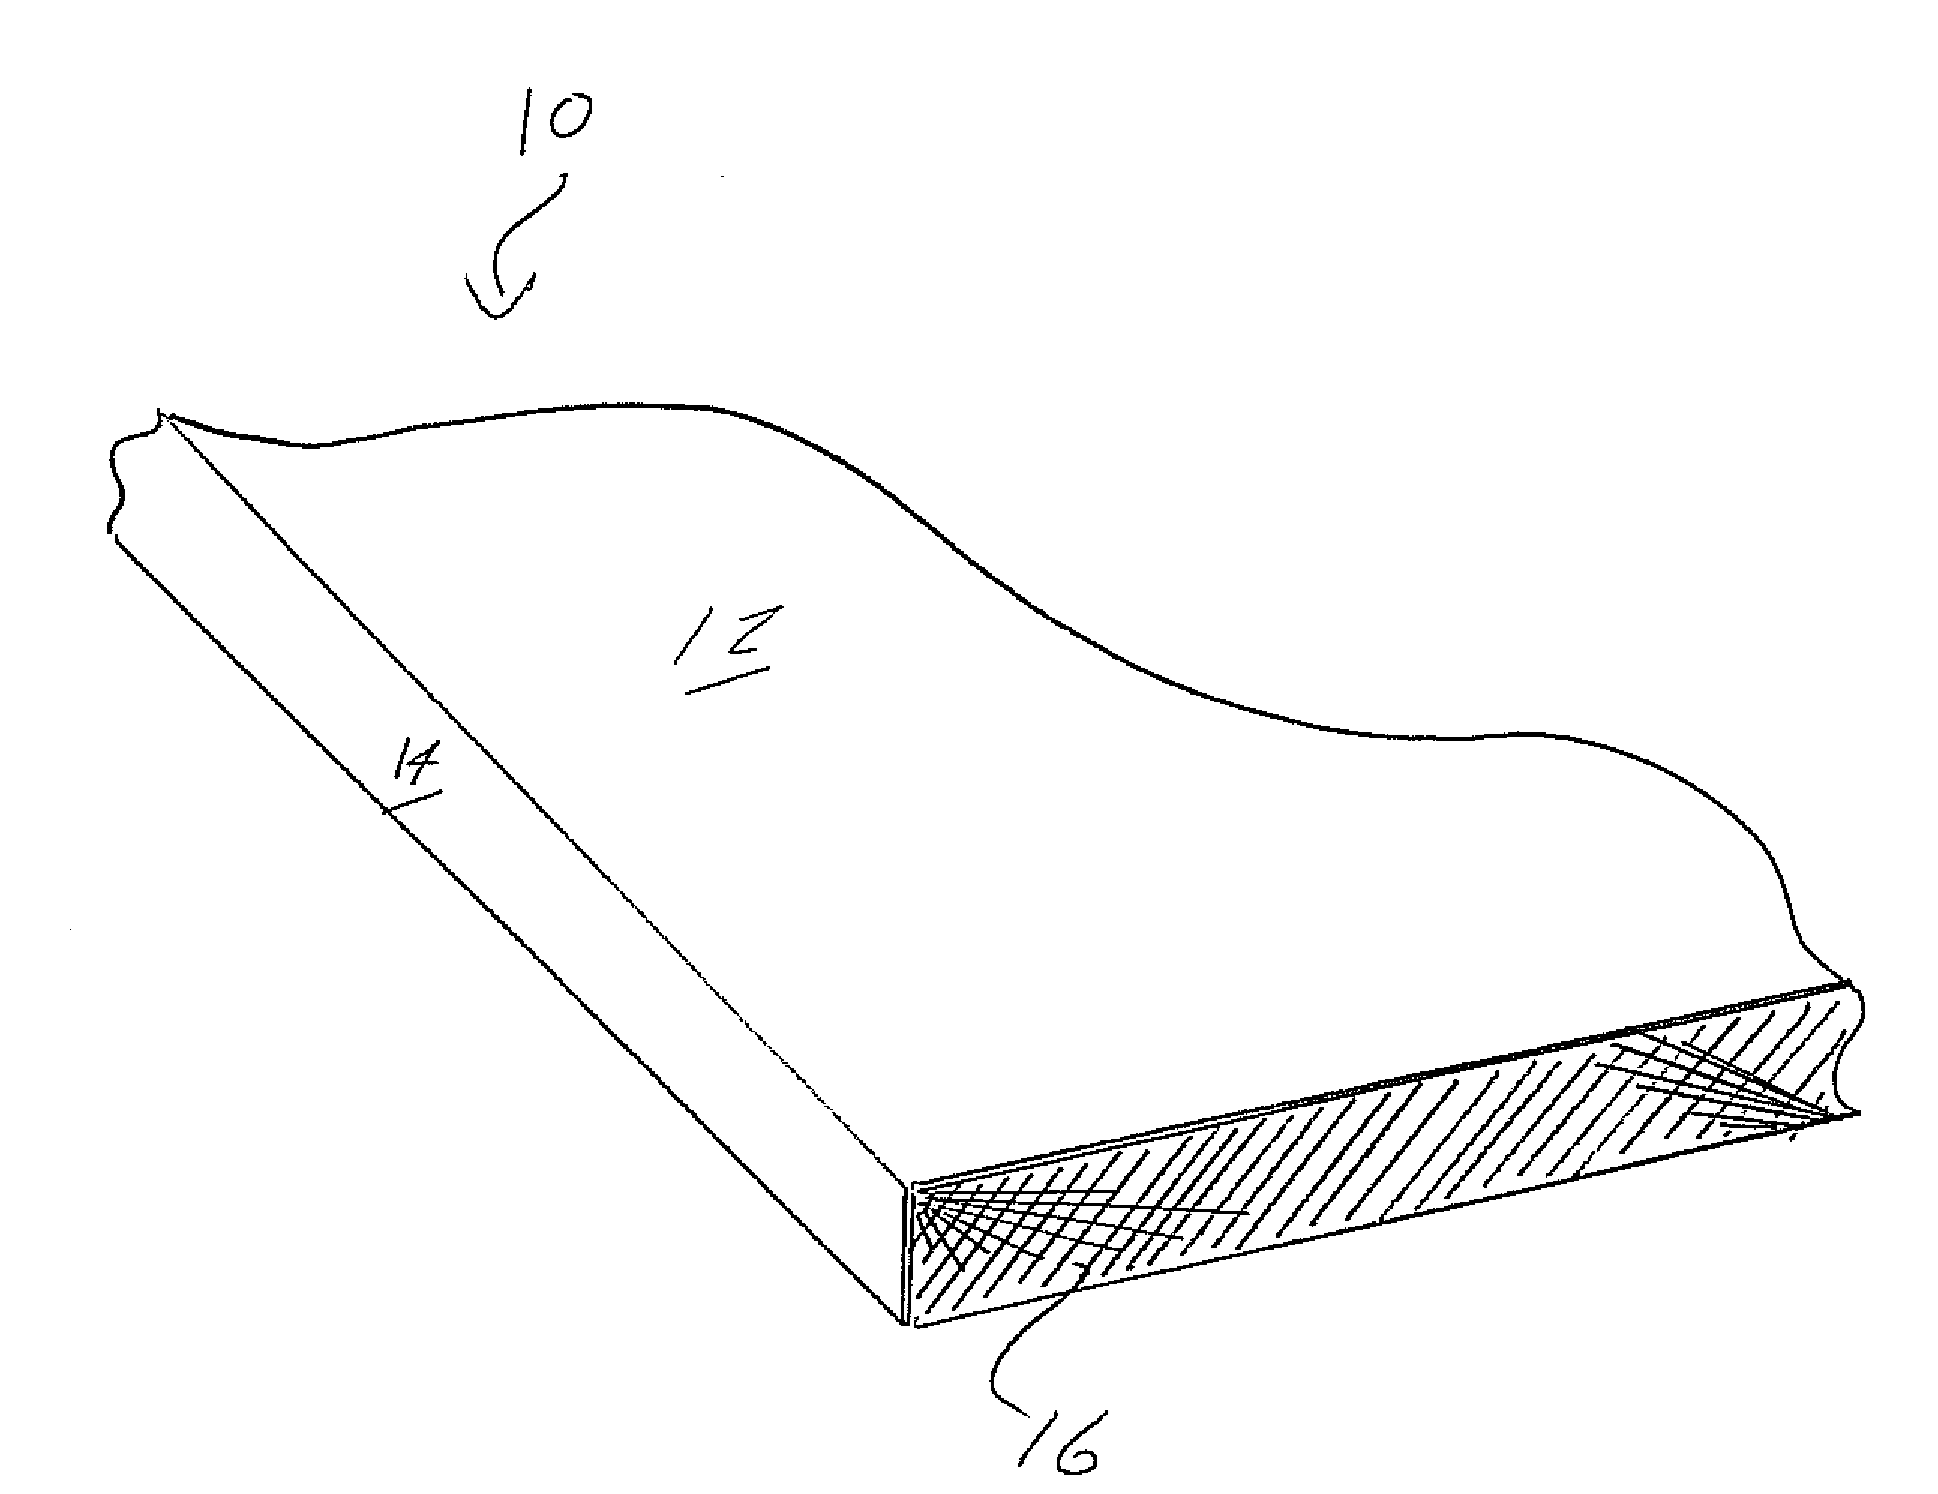 Polymer-Based Face Panel Veneer and Edgeband System for Producing Decorative Panels Having Increased Durability and Decorative Effect and Associated Methods for Producing Such a System